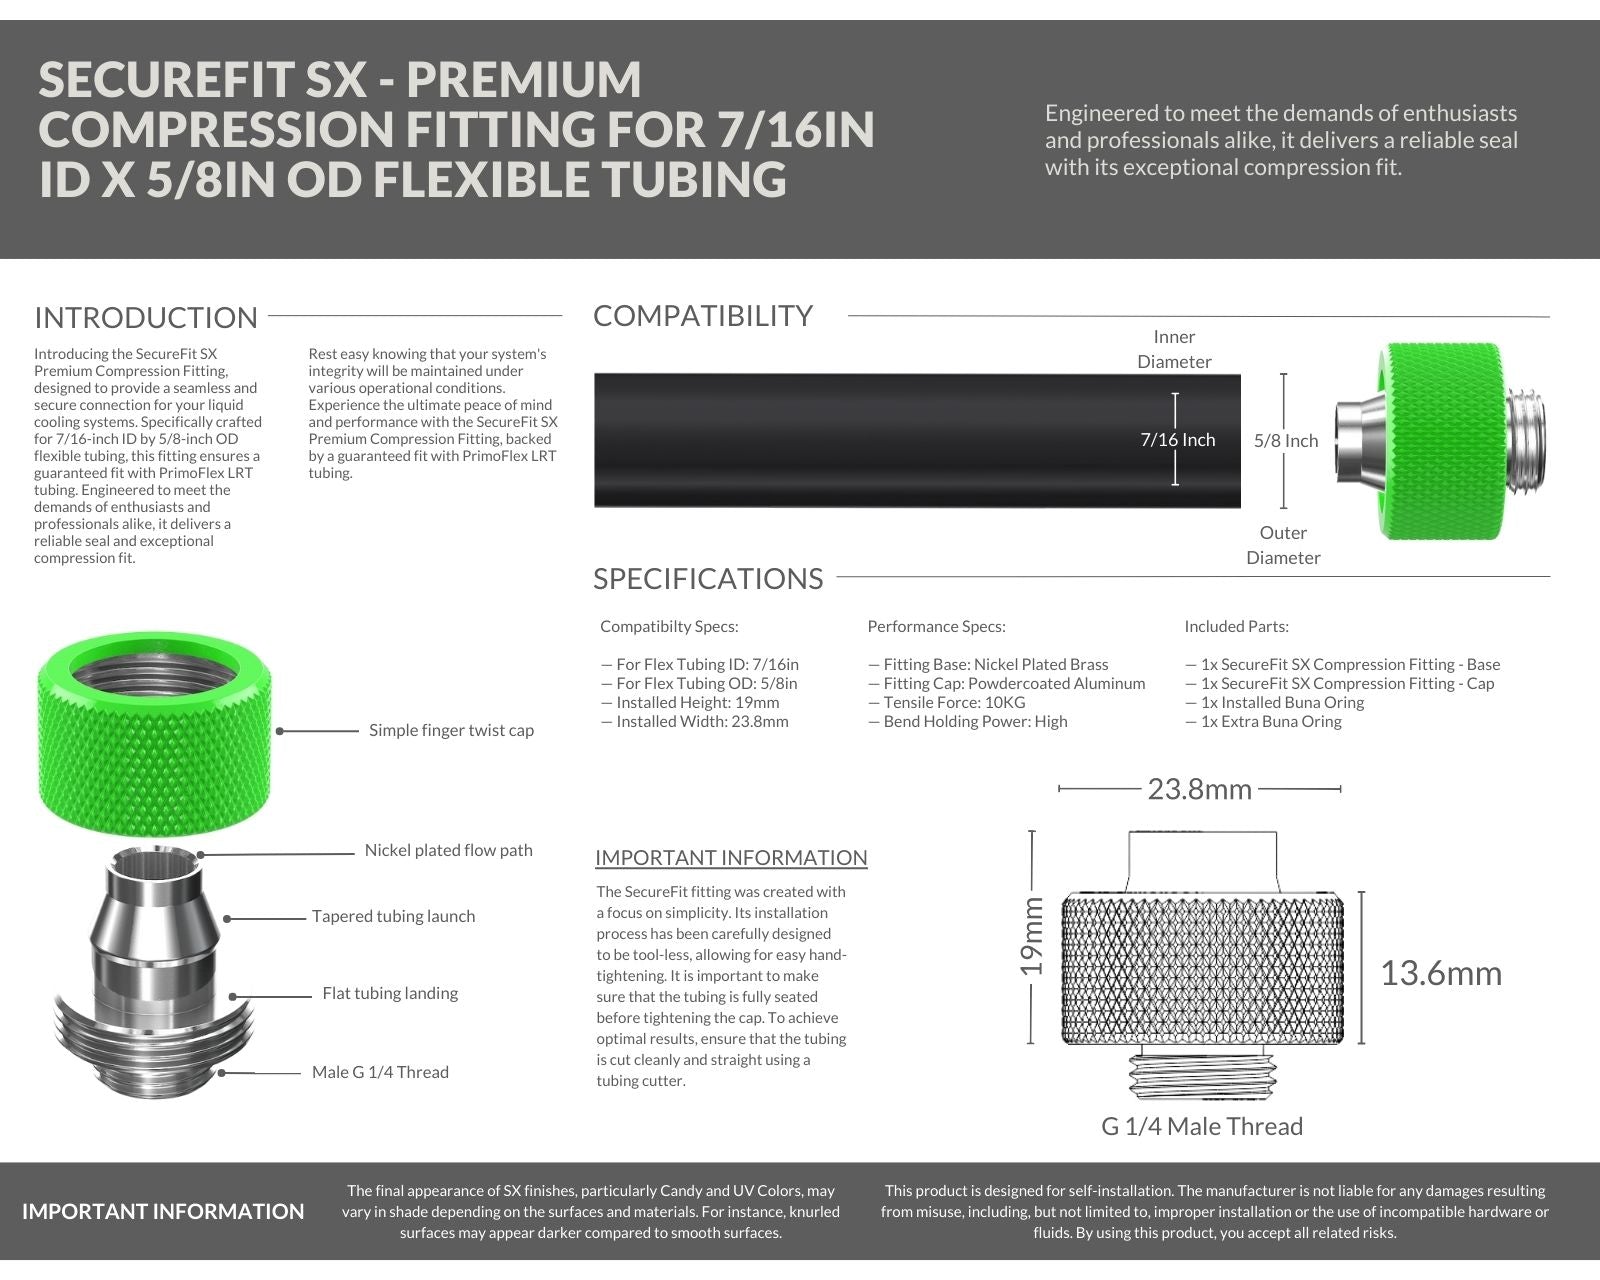 PrimoChill SecureFit SX - Premium Compression Fitting For 7/16in ID x 5/8in OD Flexible Tubing (F-SFSX758) - Available in 20+ Colors, Custom Watercooling Loop Ready - UV Green